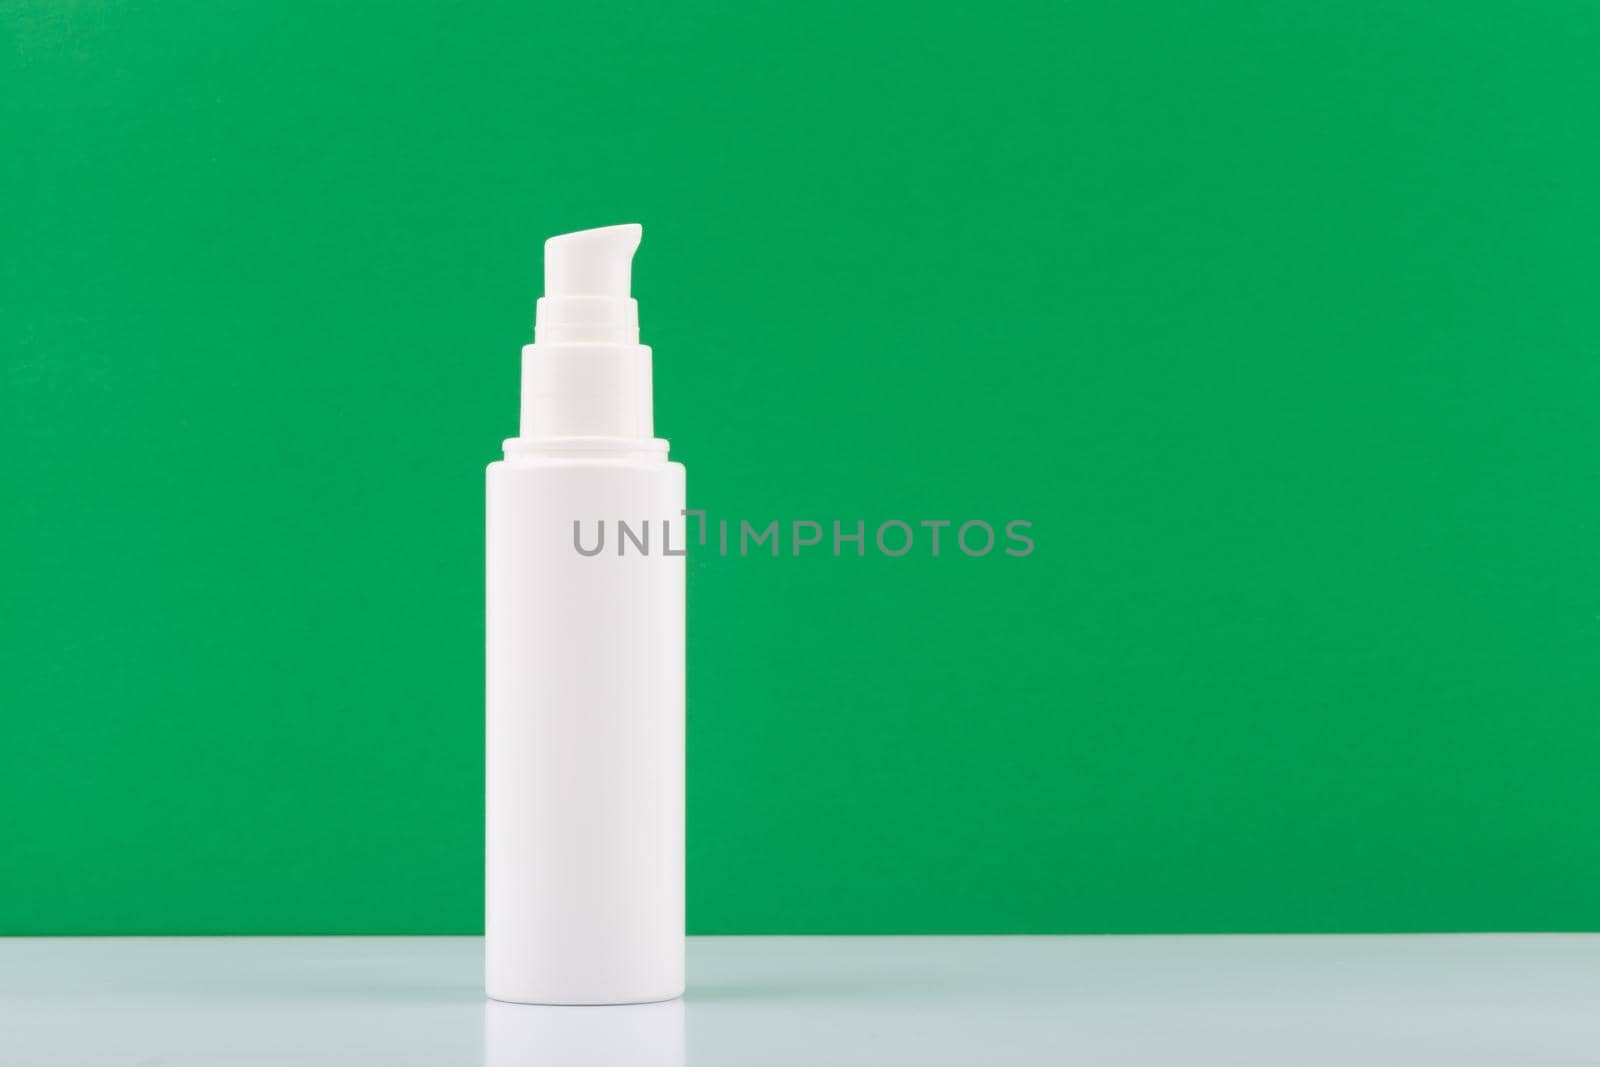 White cream or lotion tube on white glossy table against green background with copy space. Concept of organic cosmetic with natural ingredients